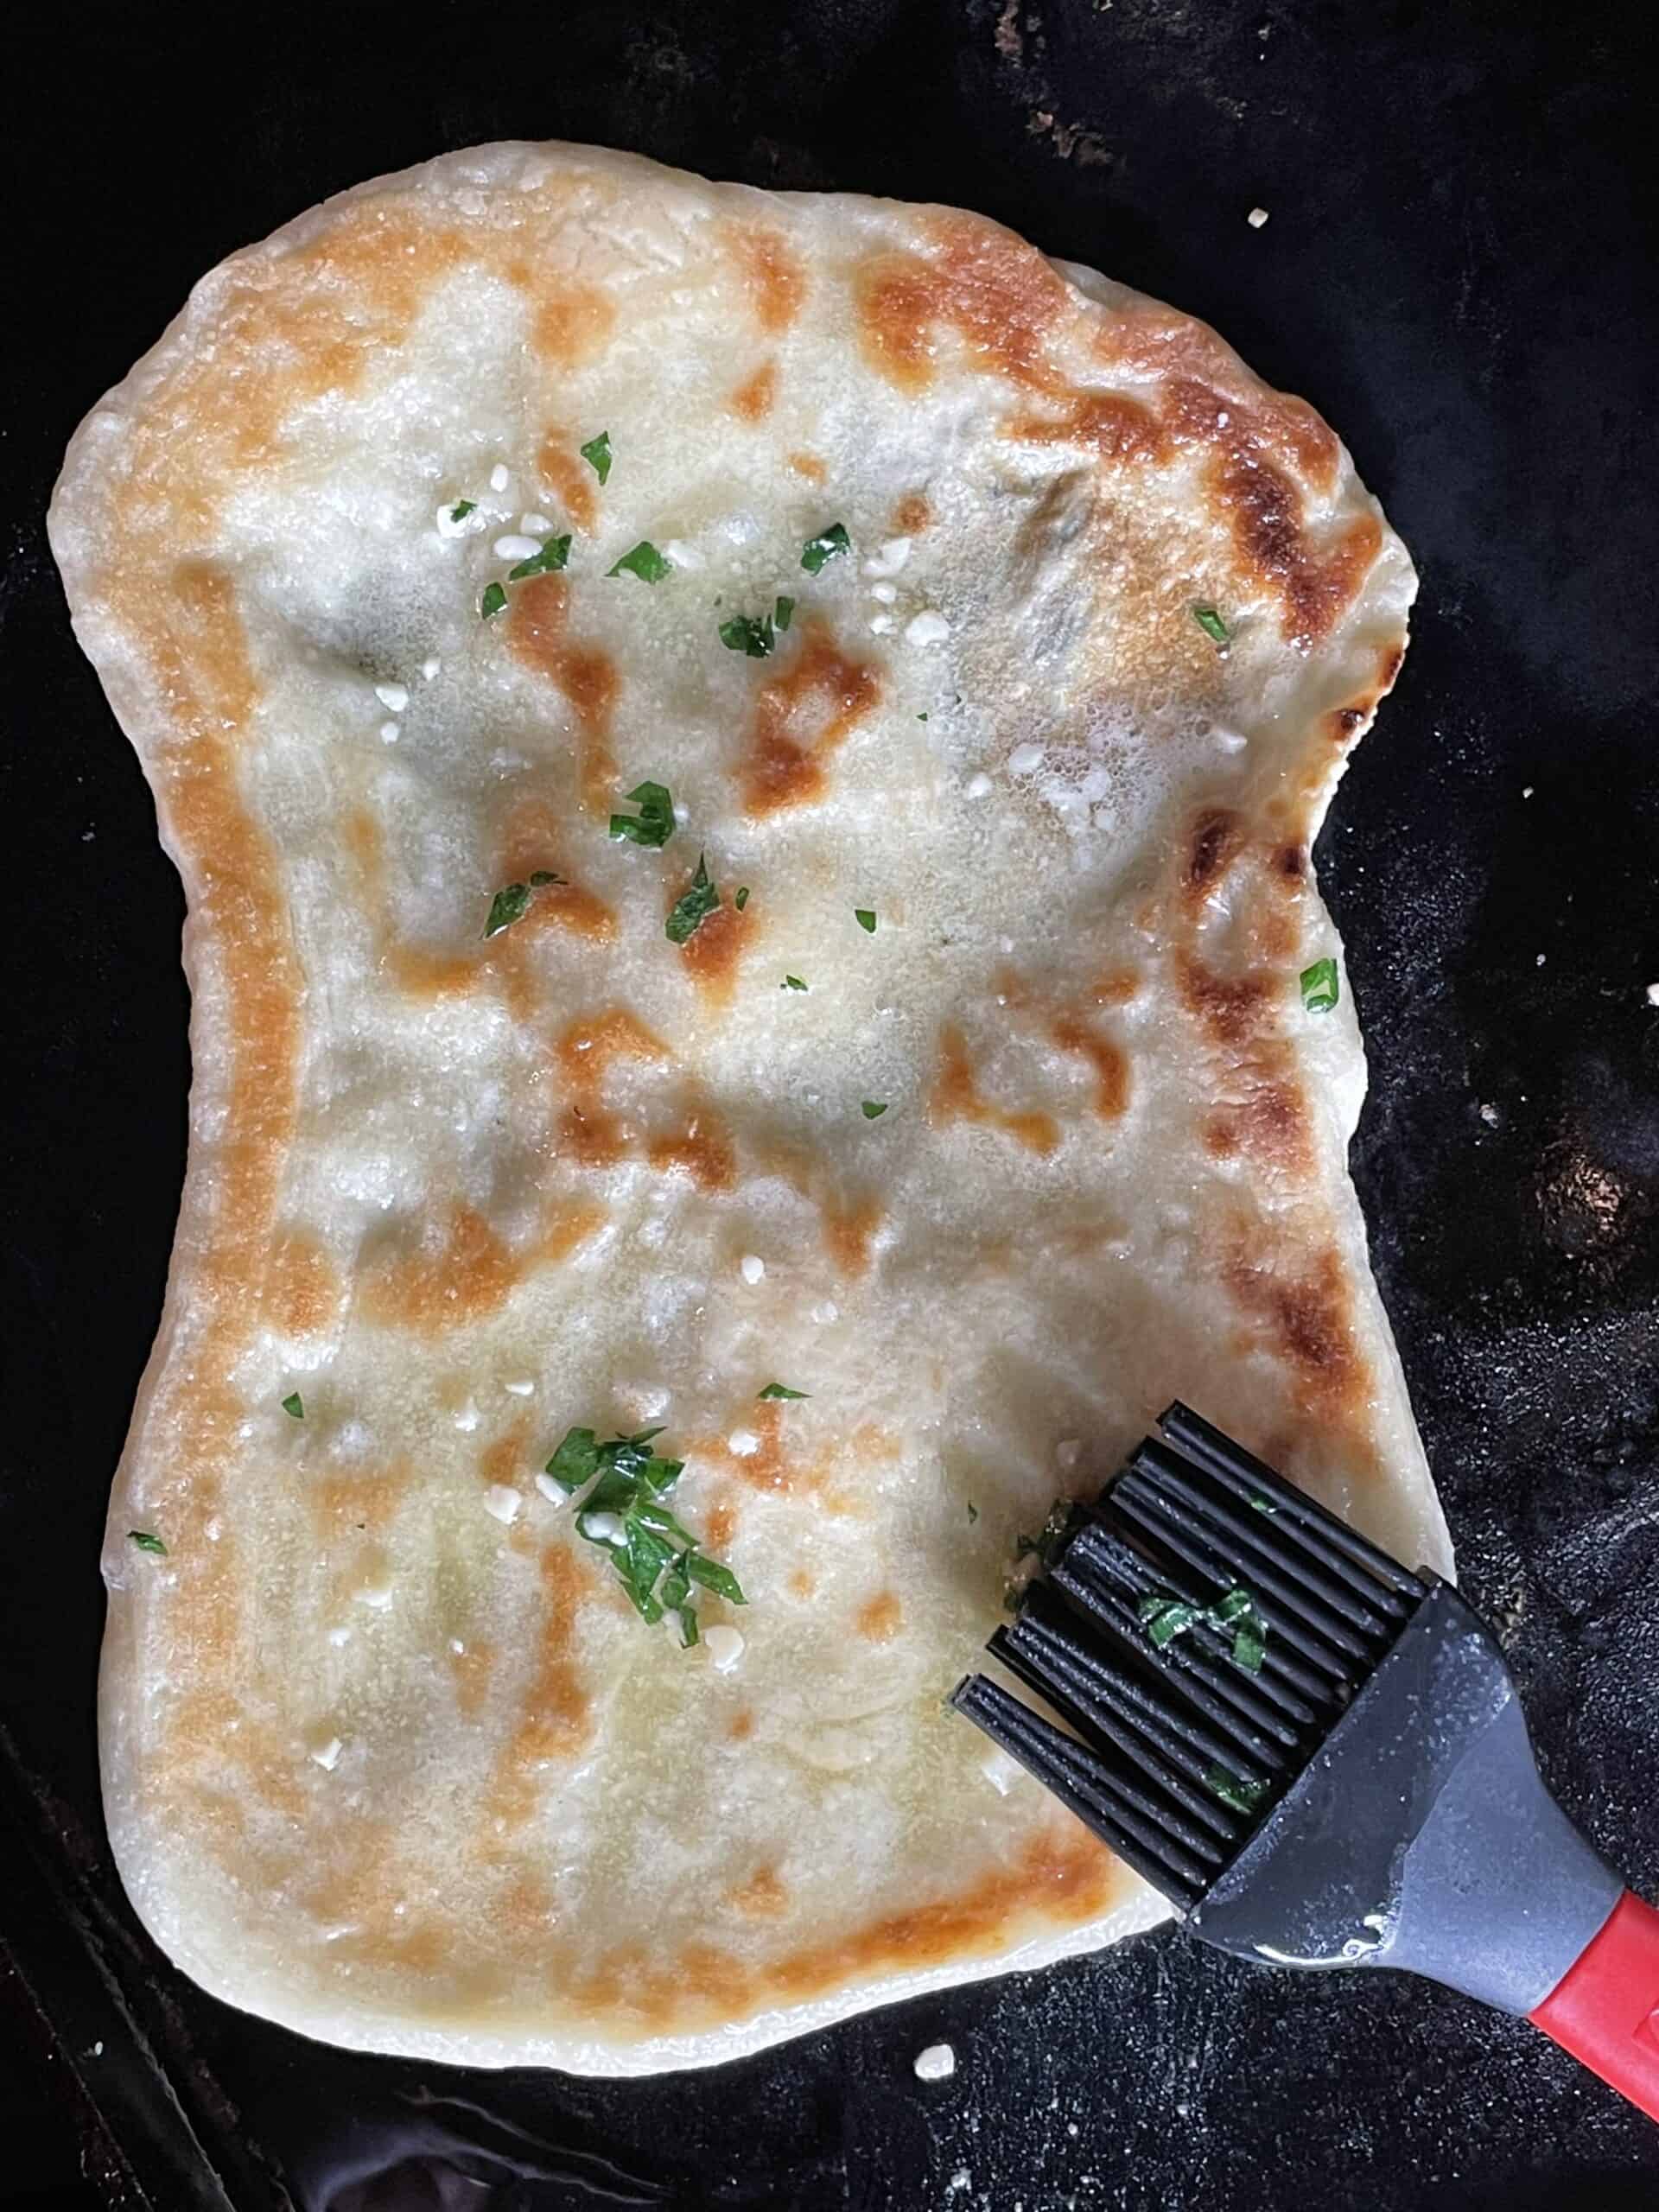 Griddle Cheesy Chicken Quesadilla Recipe - From Michigan To The Table